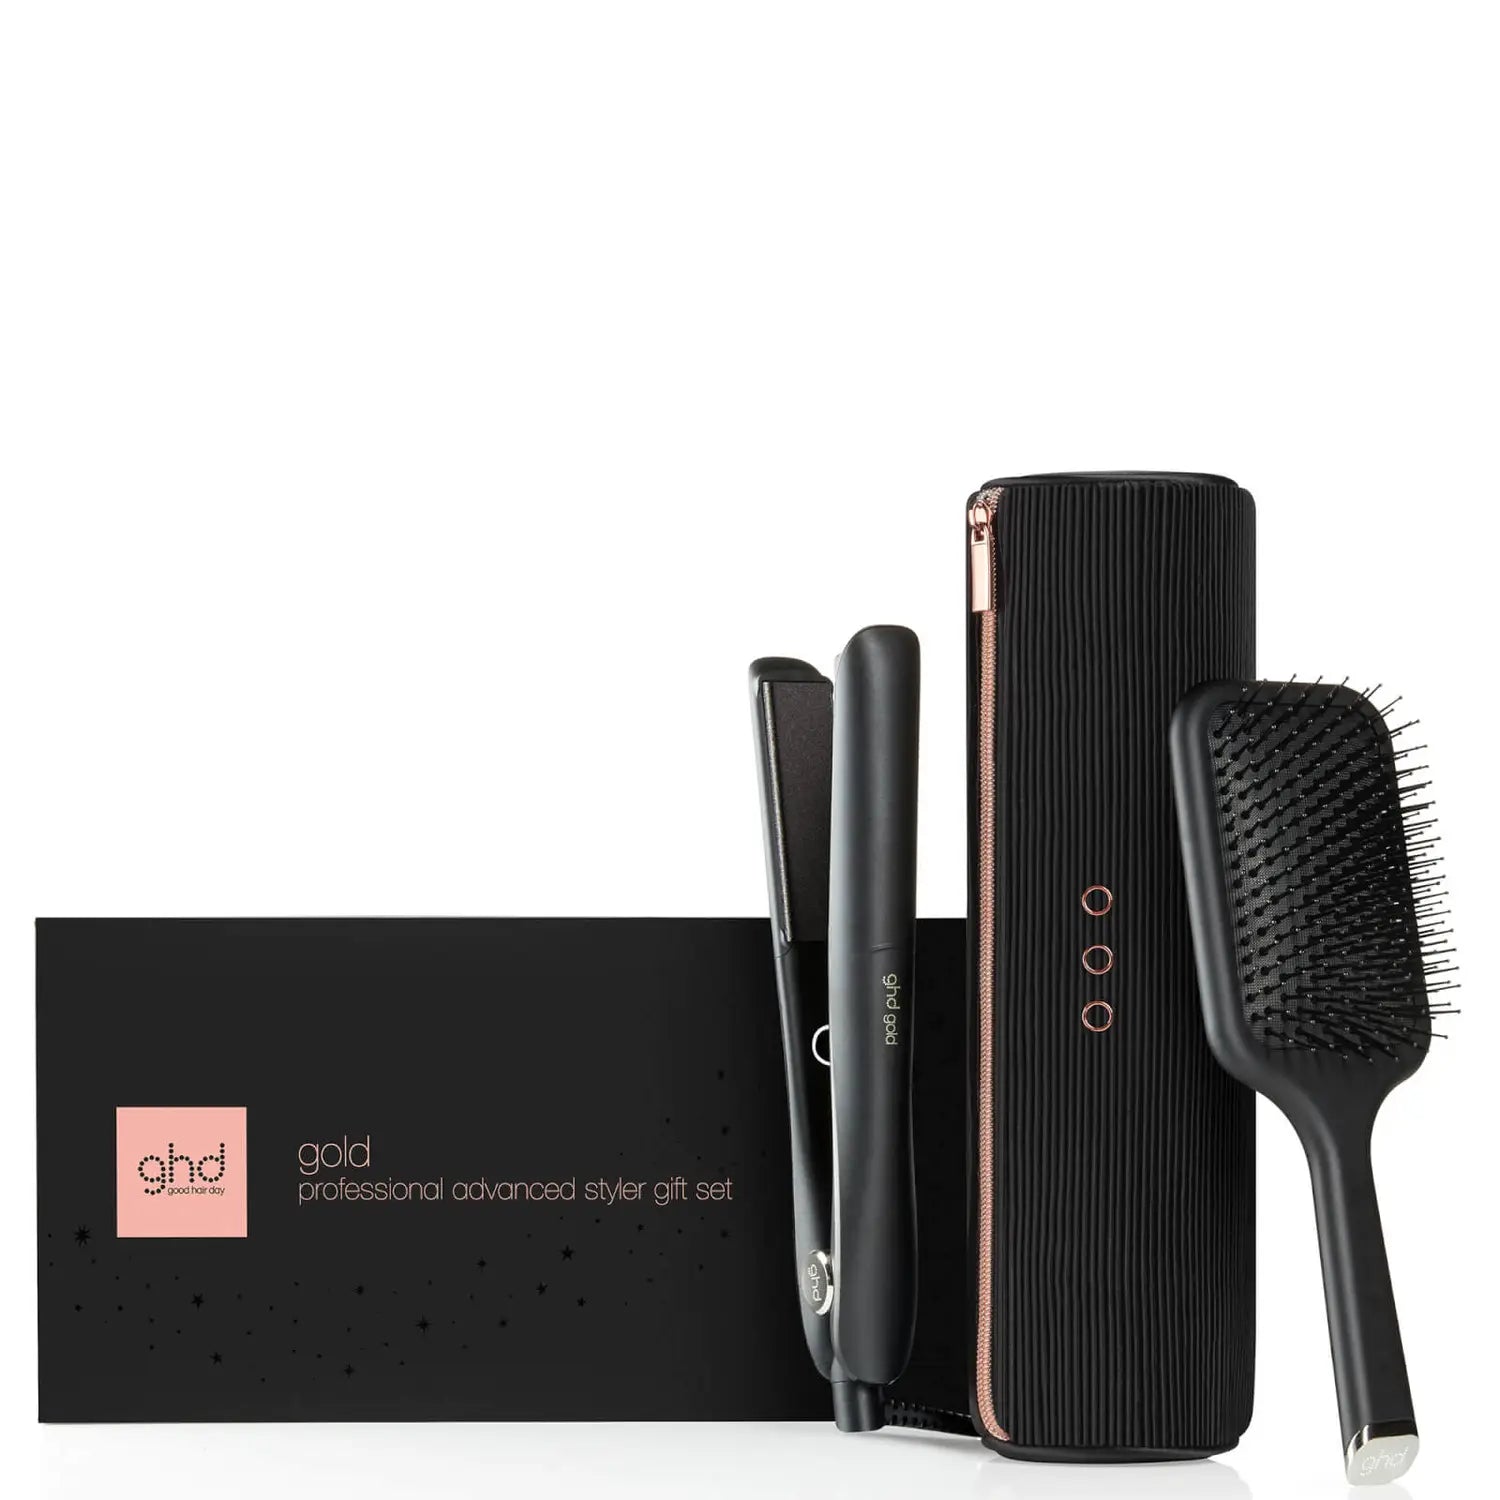 ghd Gold Hair Straightener Christmas Gift Set, with packaging